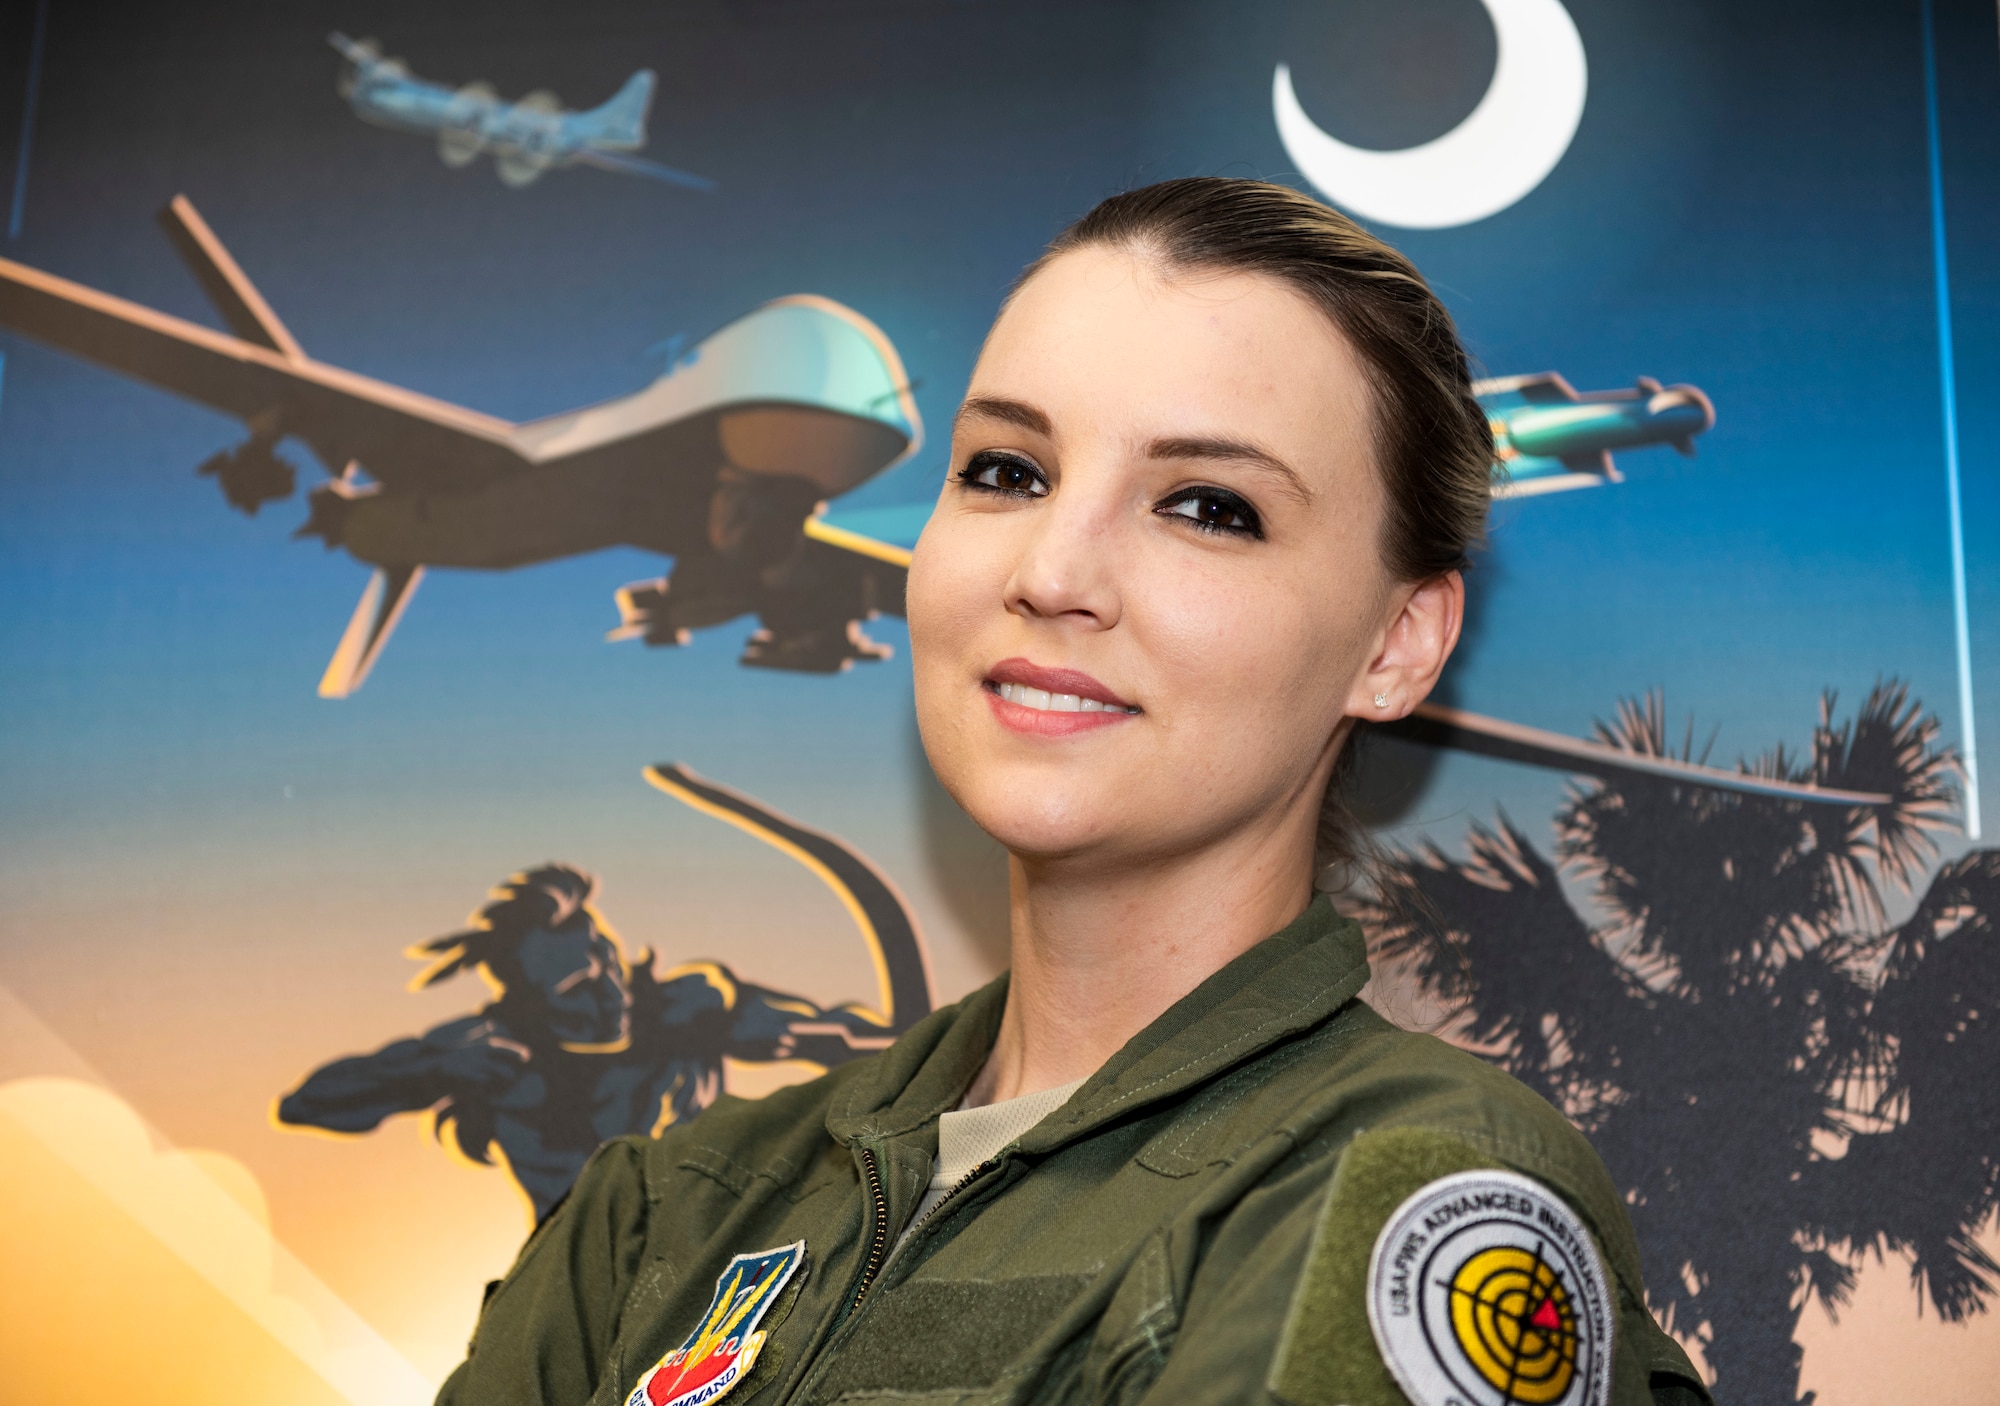 U.S. Air Force Tech. Sgt. Megan, 25th Operations Support Squadron operations flight chief and sensor operator instructor stands, at Shaw Air Force Base, South Carolina, July 9, 2019.